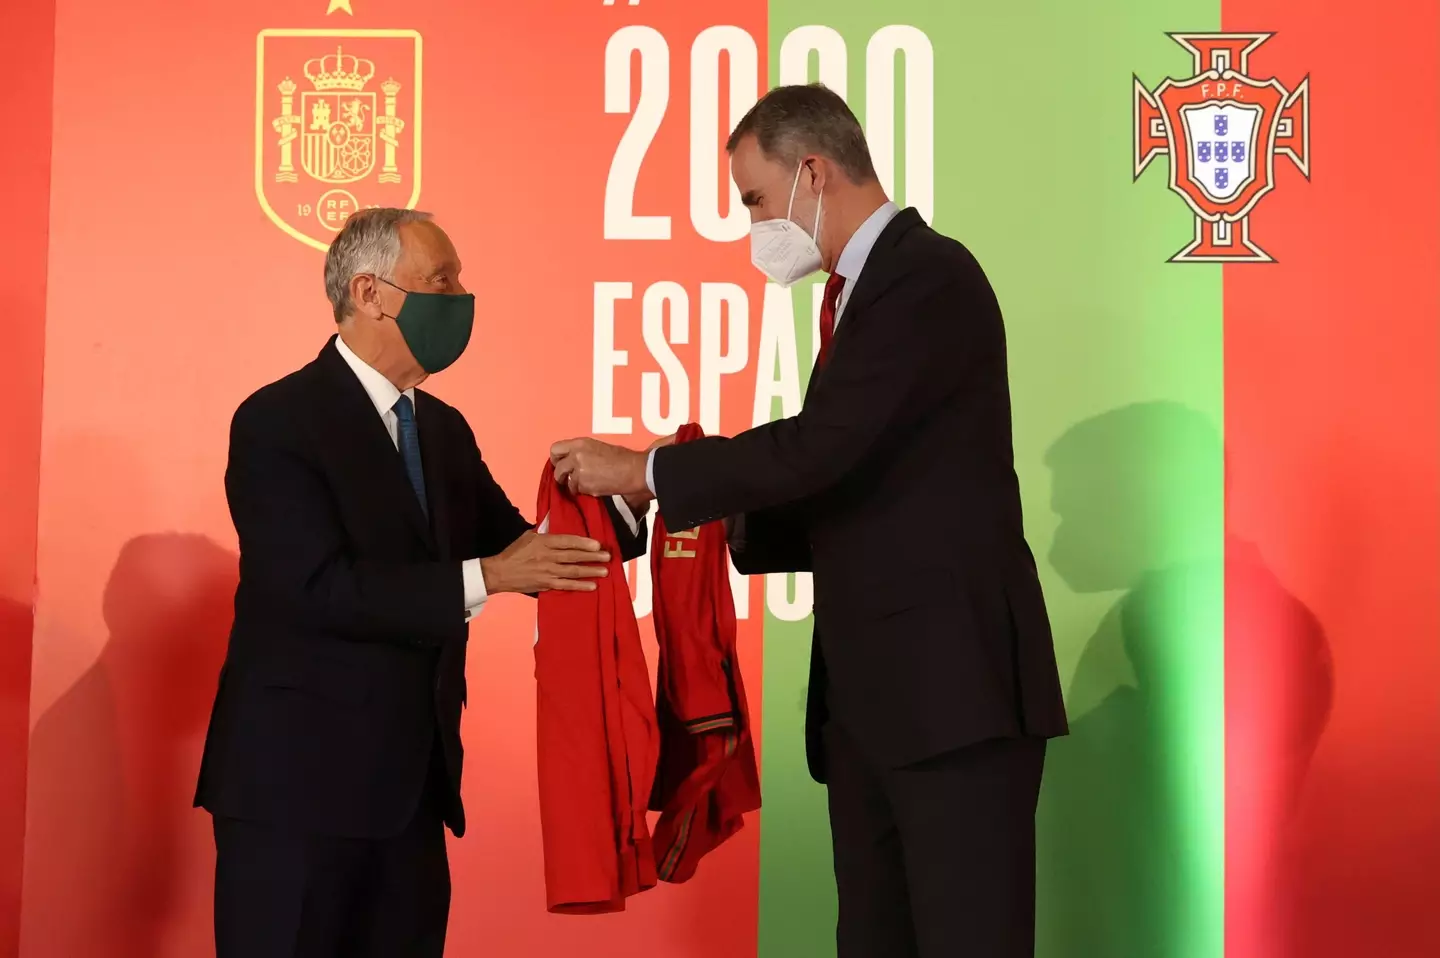 Ukraine is set to join Spain and Portugal's bid to host the 2030 World Cup (Image: Alamy)